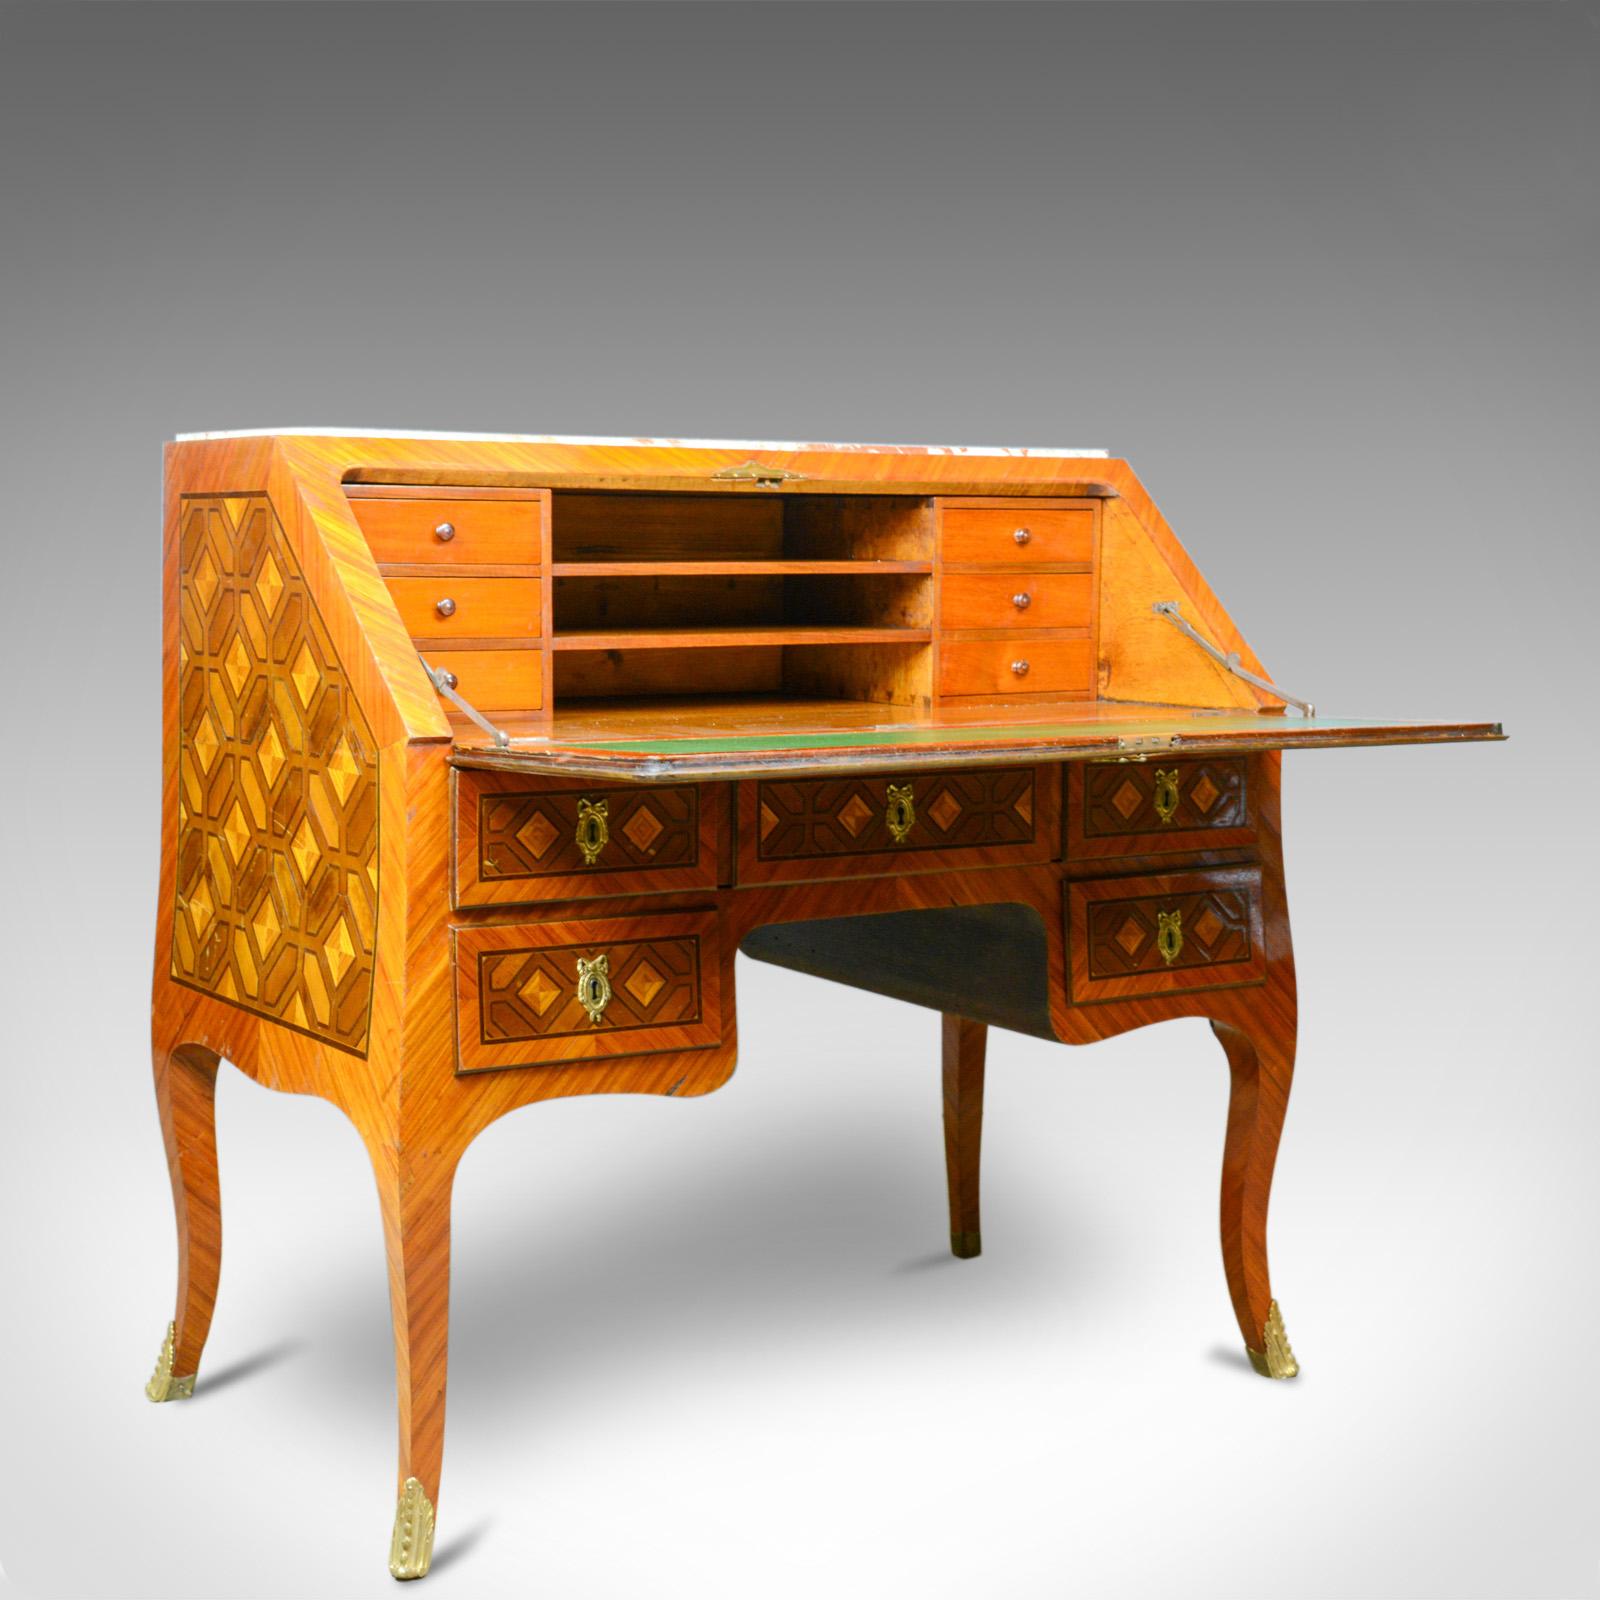 This is an antique bureau. A French, marble top, kingwood, marquetry desk dating to the turn of the 20th century, circa 1900.

An interesting and unusual antique bureau
The kingwood displaying good colour and grain
Desirable aged patina with a